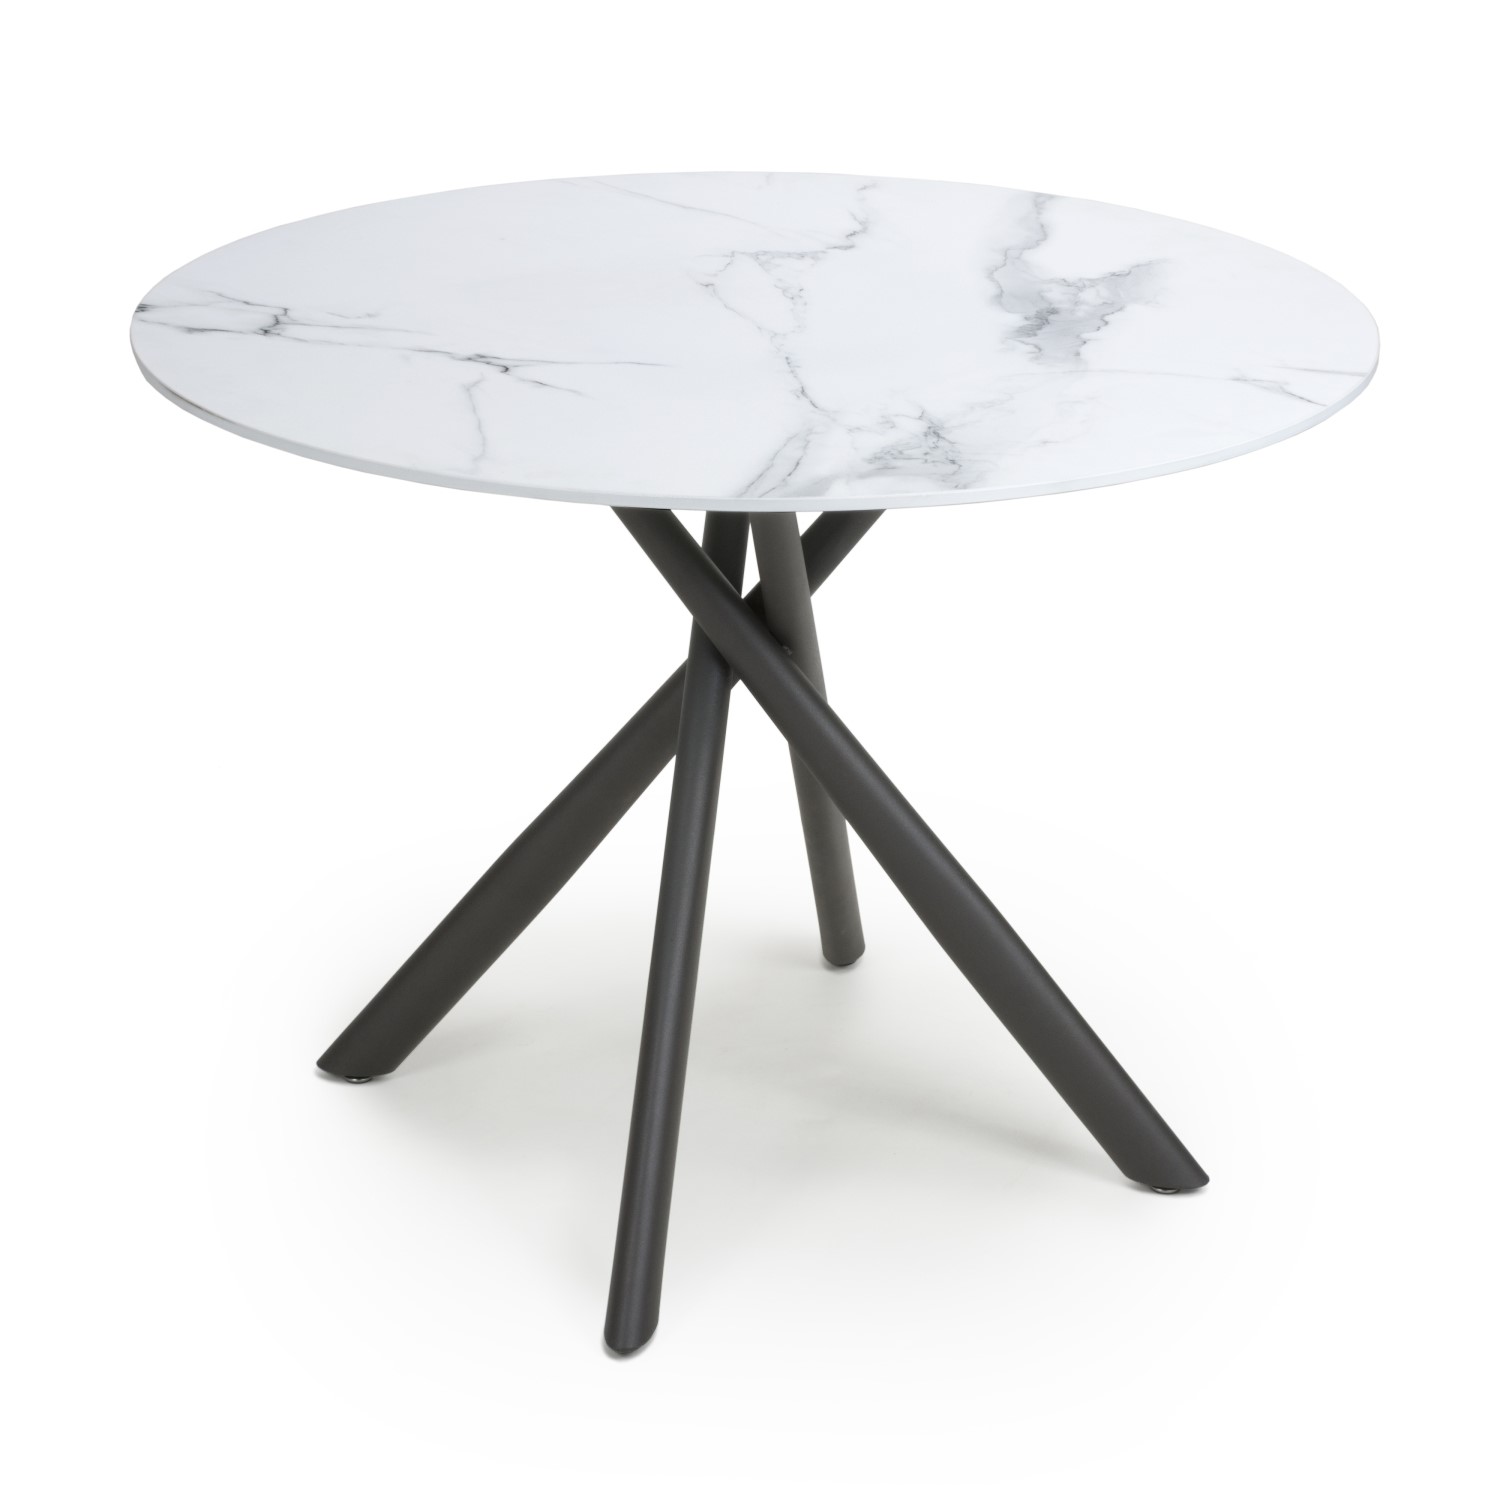 Photo of Small round white marble effect dining table - seats 4 - avesta